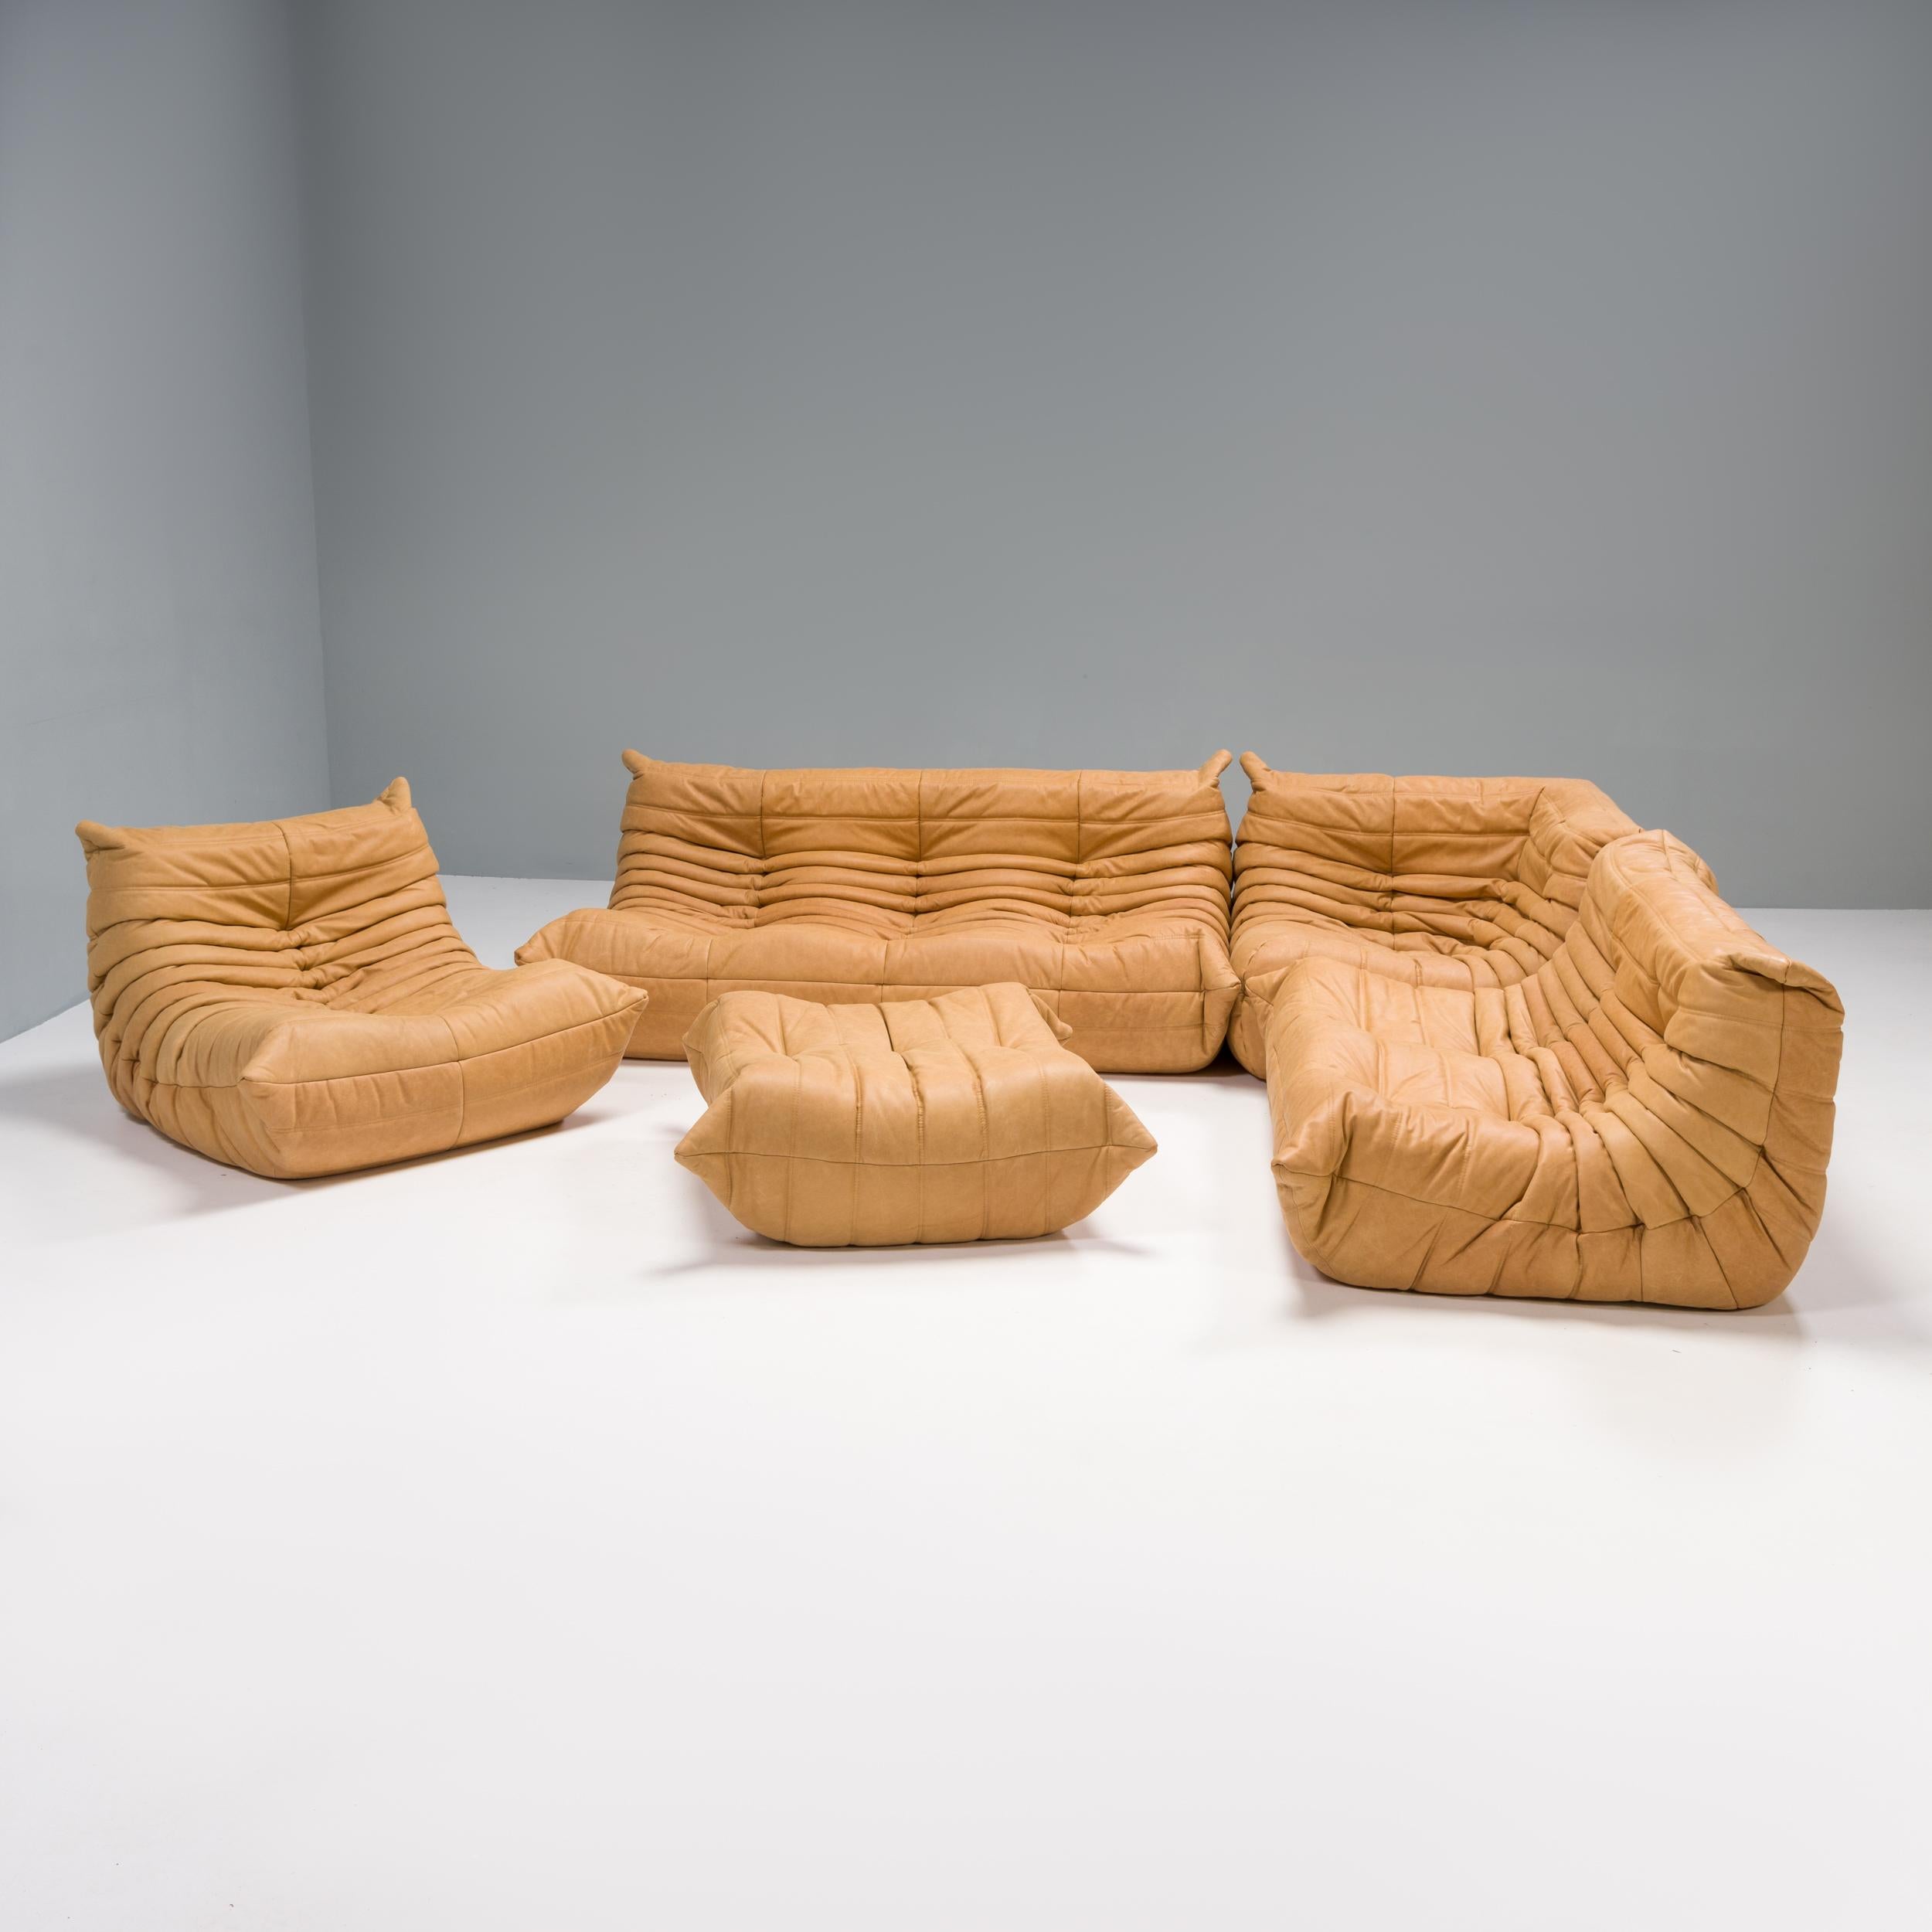 The iconic Togo orange sofa set, originally designed by Michel Ducaroy for Ligne Roset in 1973, has become a design mid century classic.

The sofas have been newly reupholstered in a soft supple camel leather fabric. Made completely from foam, with